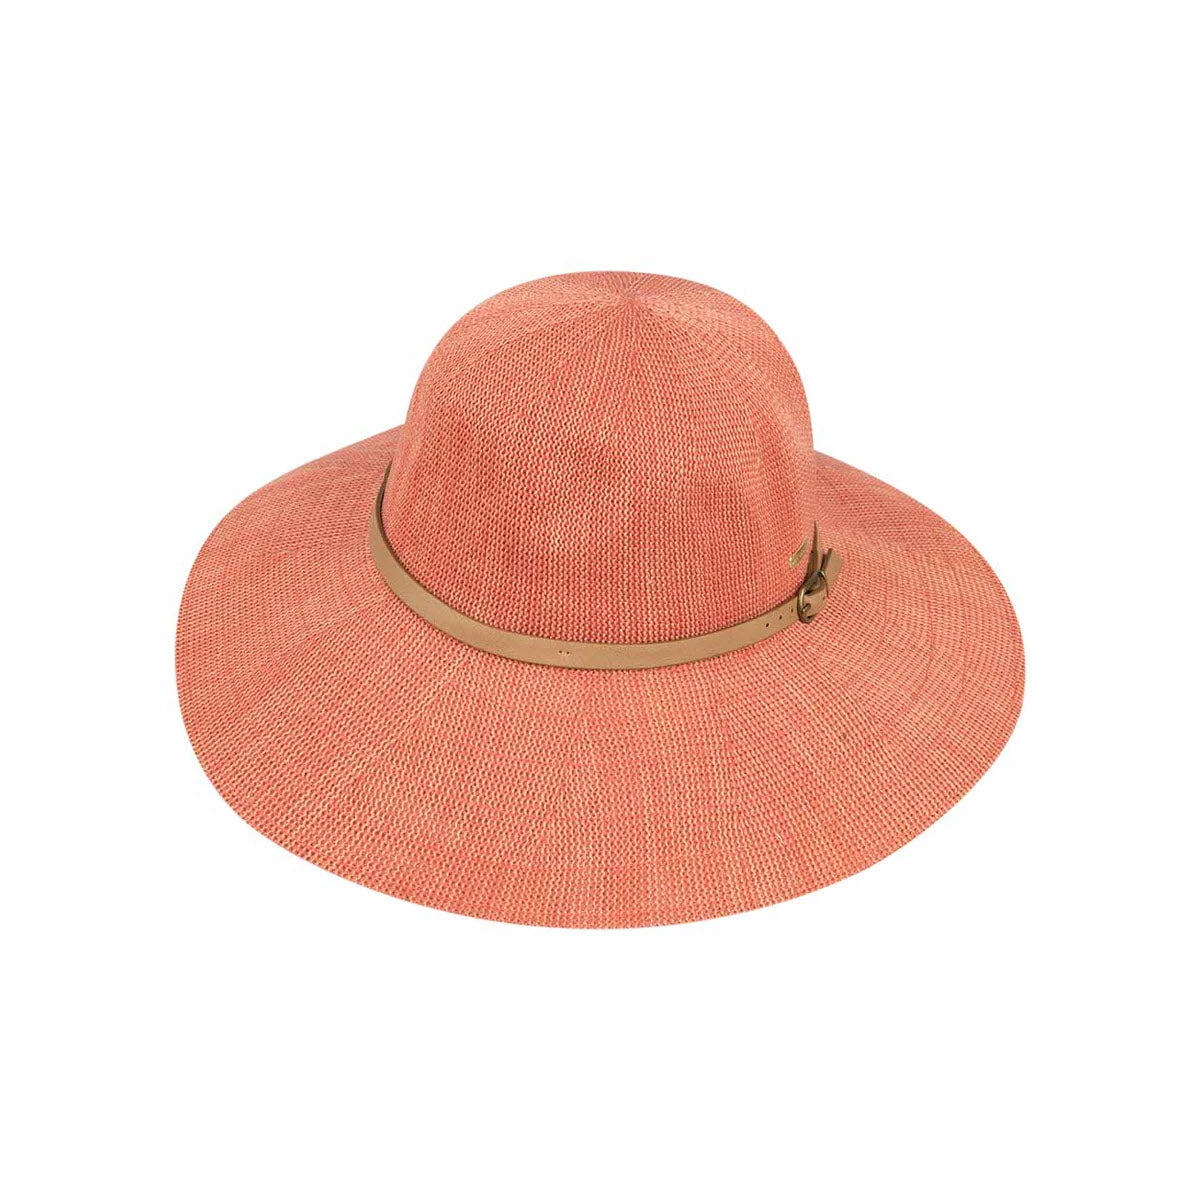 A KOORINGAL LESLIE WIDE BRIM MELON sun hat with a rounded crown and a narrow tan leather band, isolated on a white background.